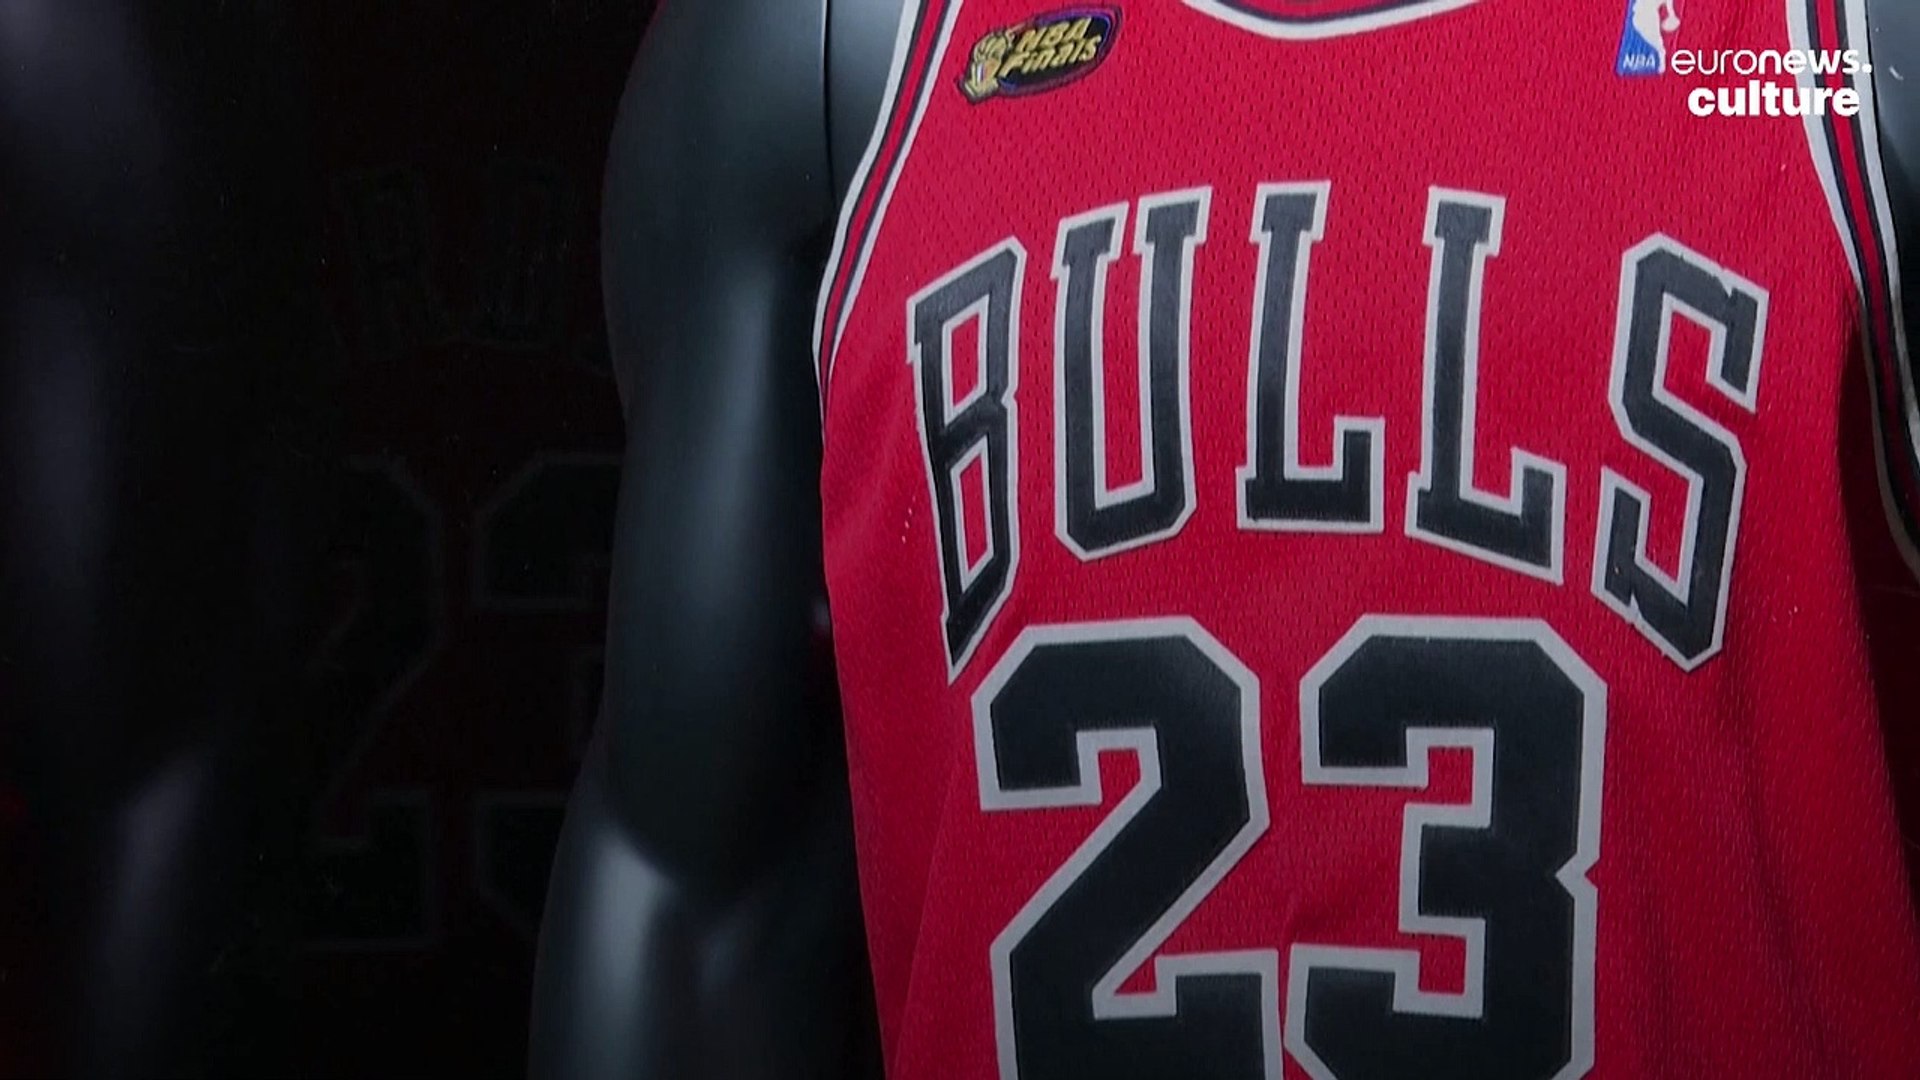 Michael Jordan's 'Last Dance' jersey sells for a record $10.1m at auction